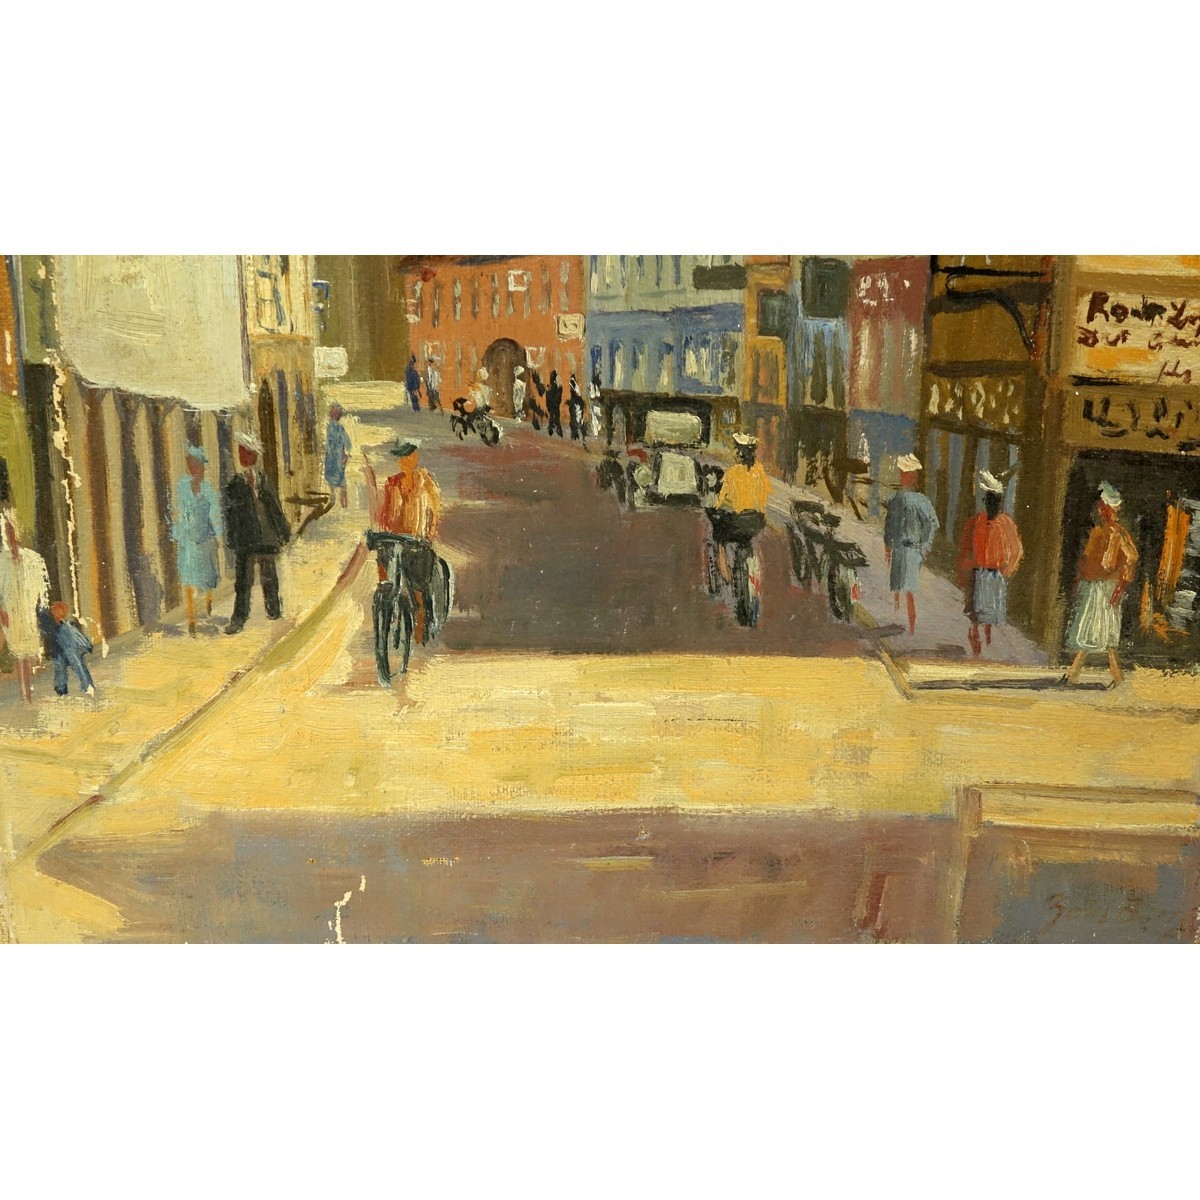 Zoma Baitler, Uruguayan  (1908 - 1994) Oil on Canvas, Street Scene, Signed Lower Right. Paint loss, wear to edges and corners.